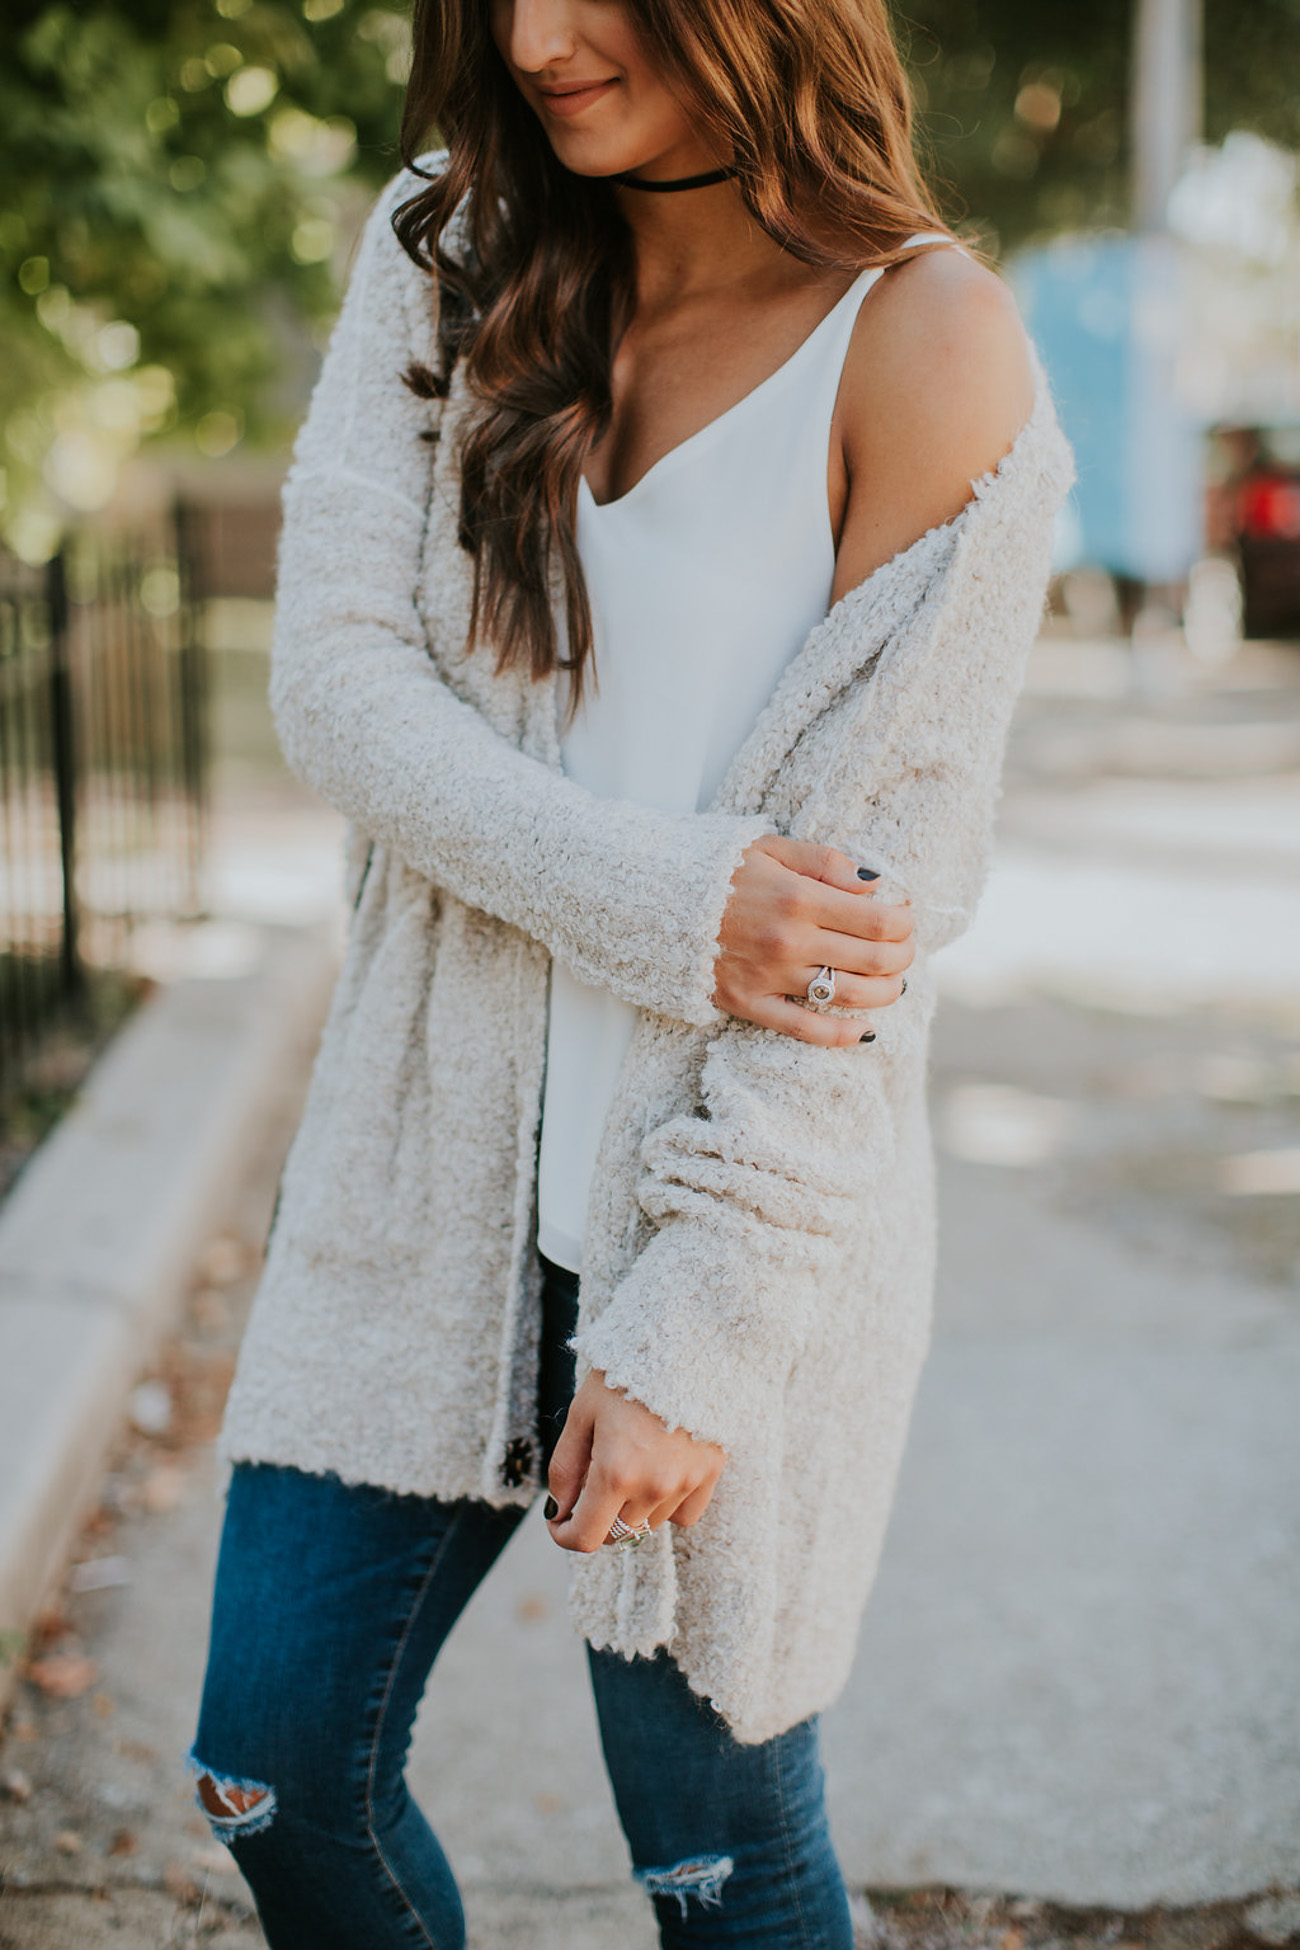 free people boucle cardigan, free people cardigan, ag distressed skinny jeans, lace up booties, fall style, cozy fall outfit, monogram crossbody bag, black monogram crossbody bag, ribbon choker necklace, southern fashion, fall fashion // grace wainwright a southern drawl